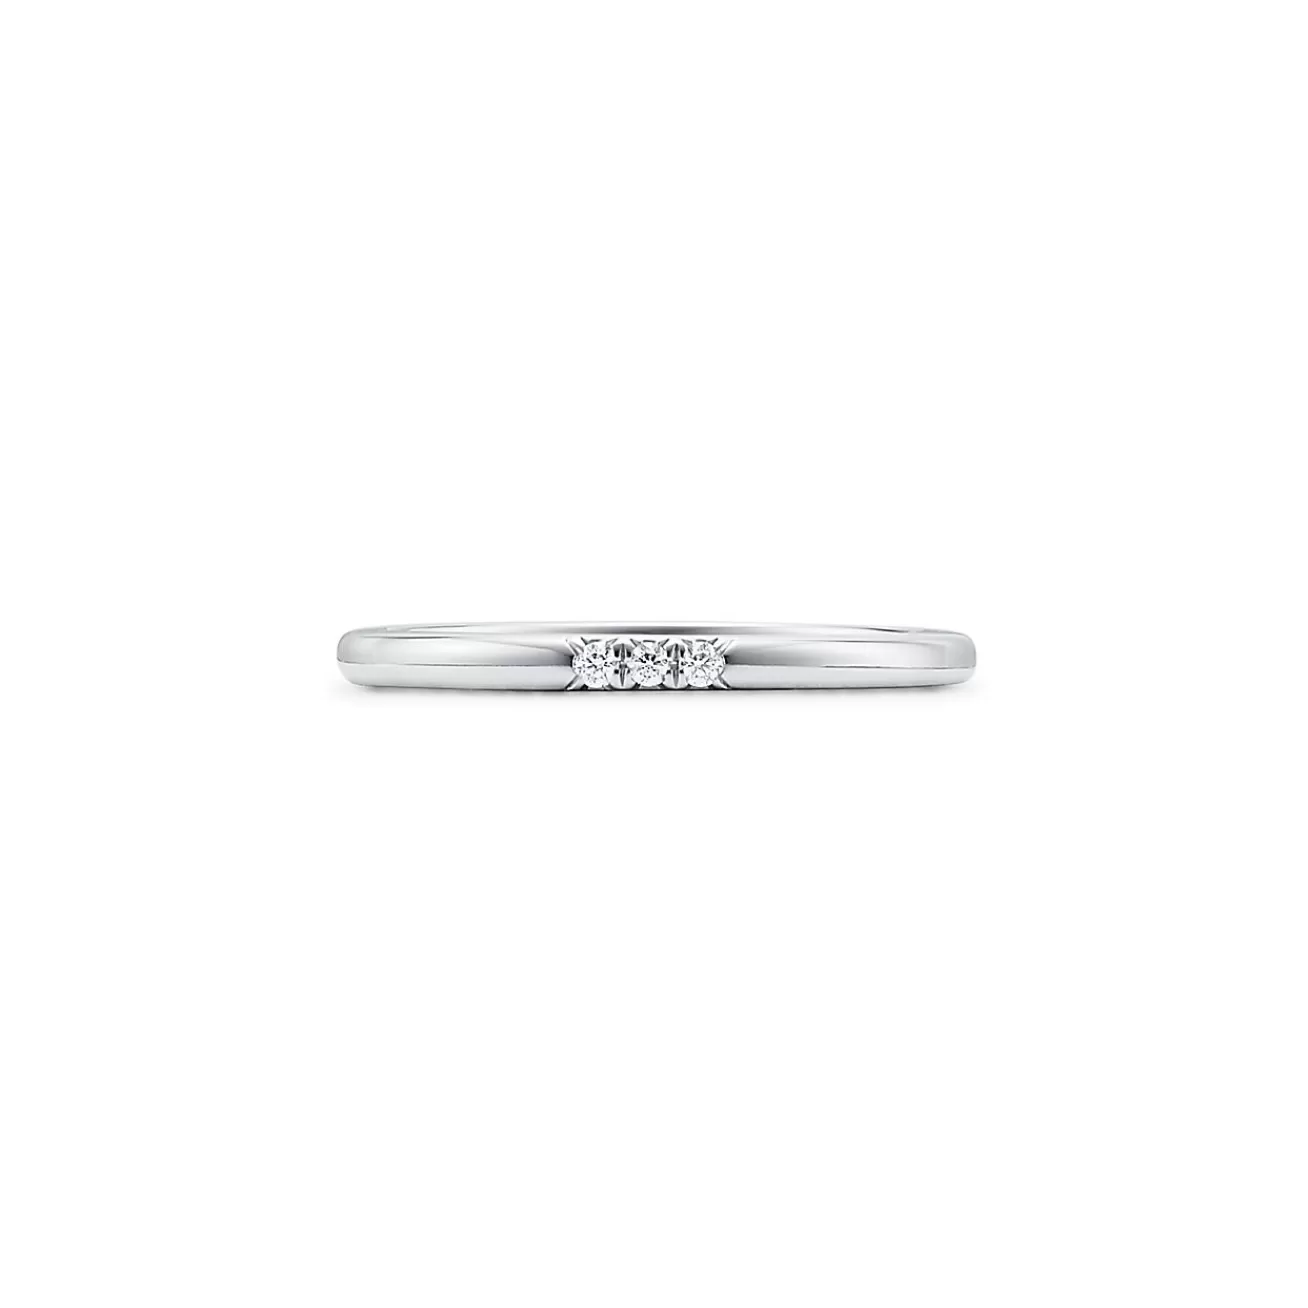 Tiffany & Co. Tiffany Forever Wedding Band Ring in Platinum with Diamonds, 2 mm Wide | ^Women Rings | Platinum Jewelry